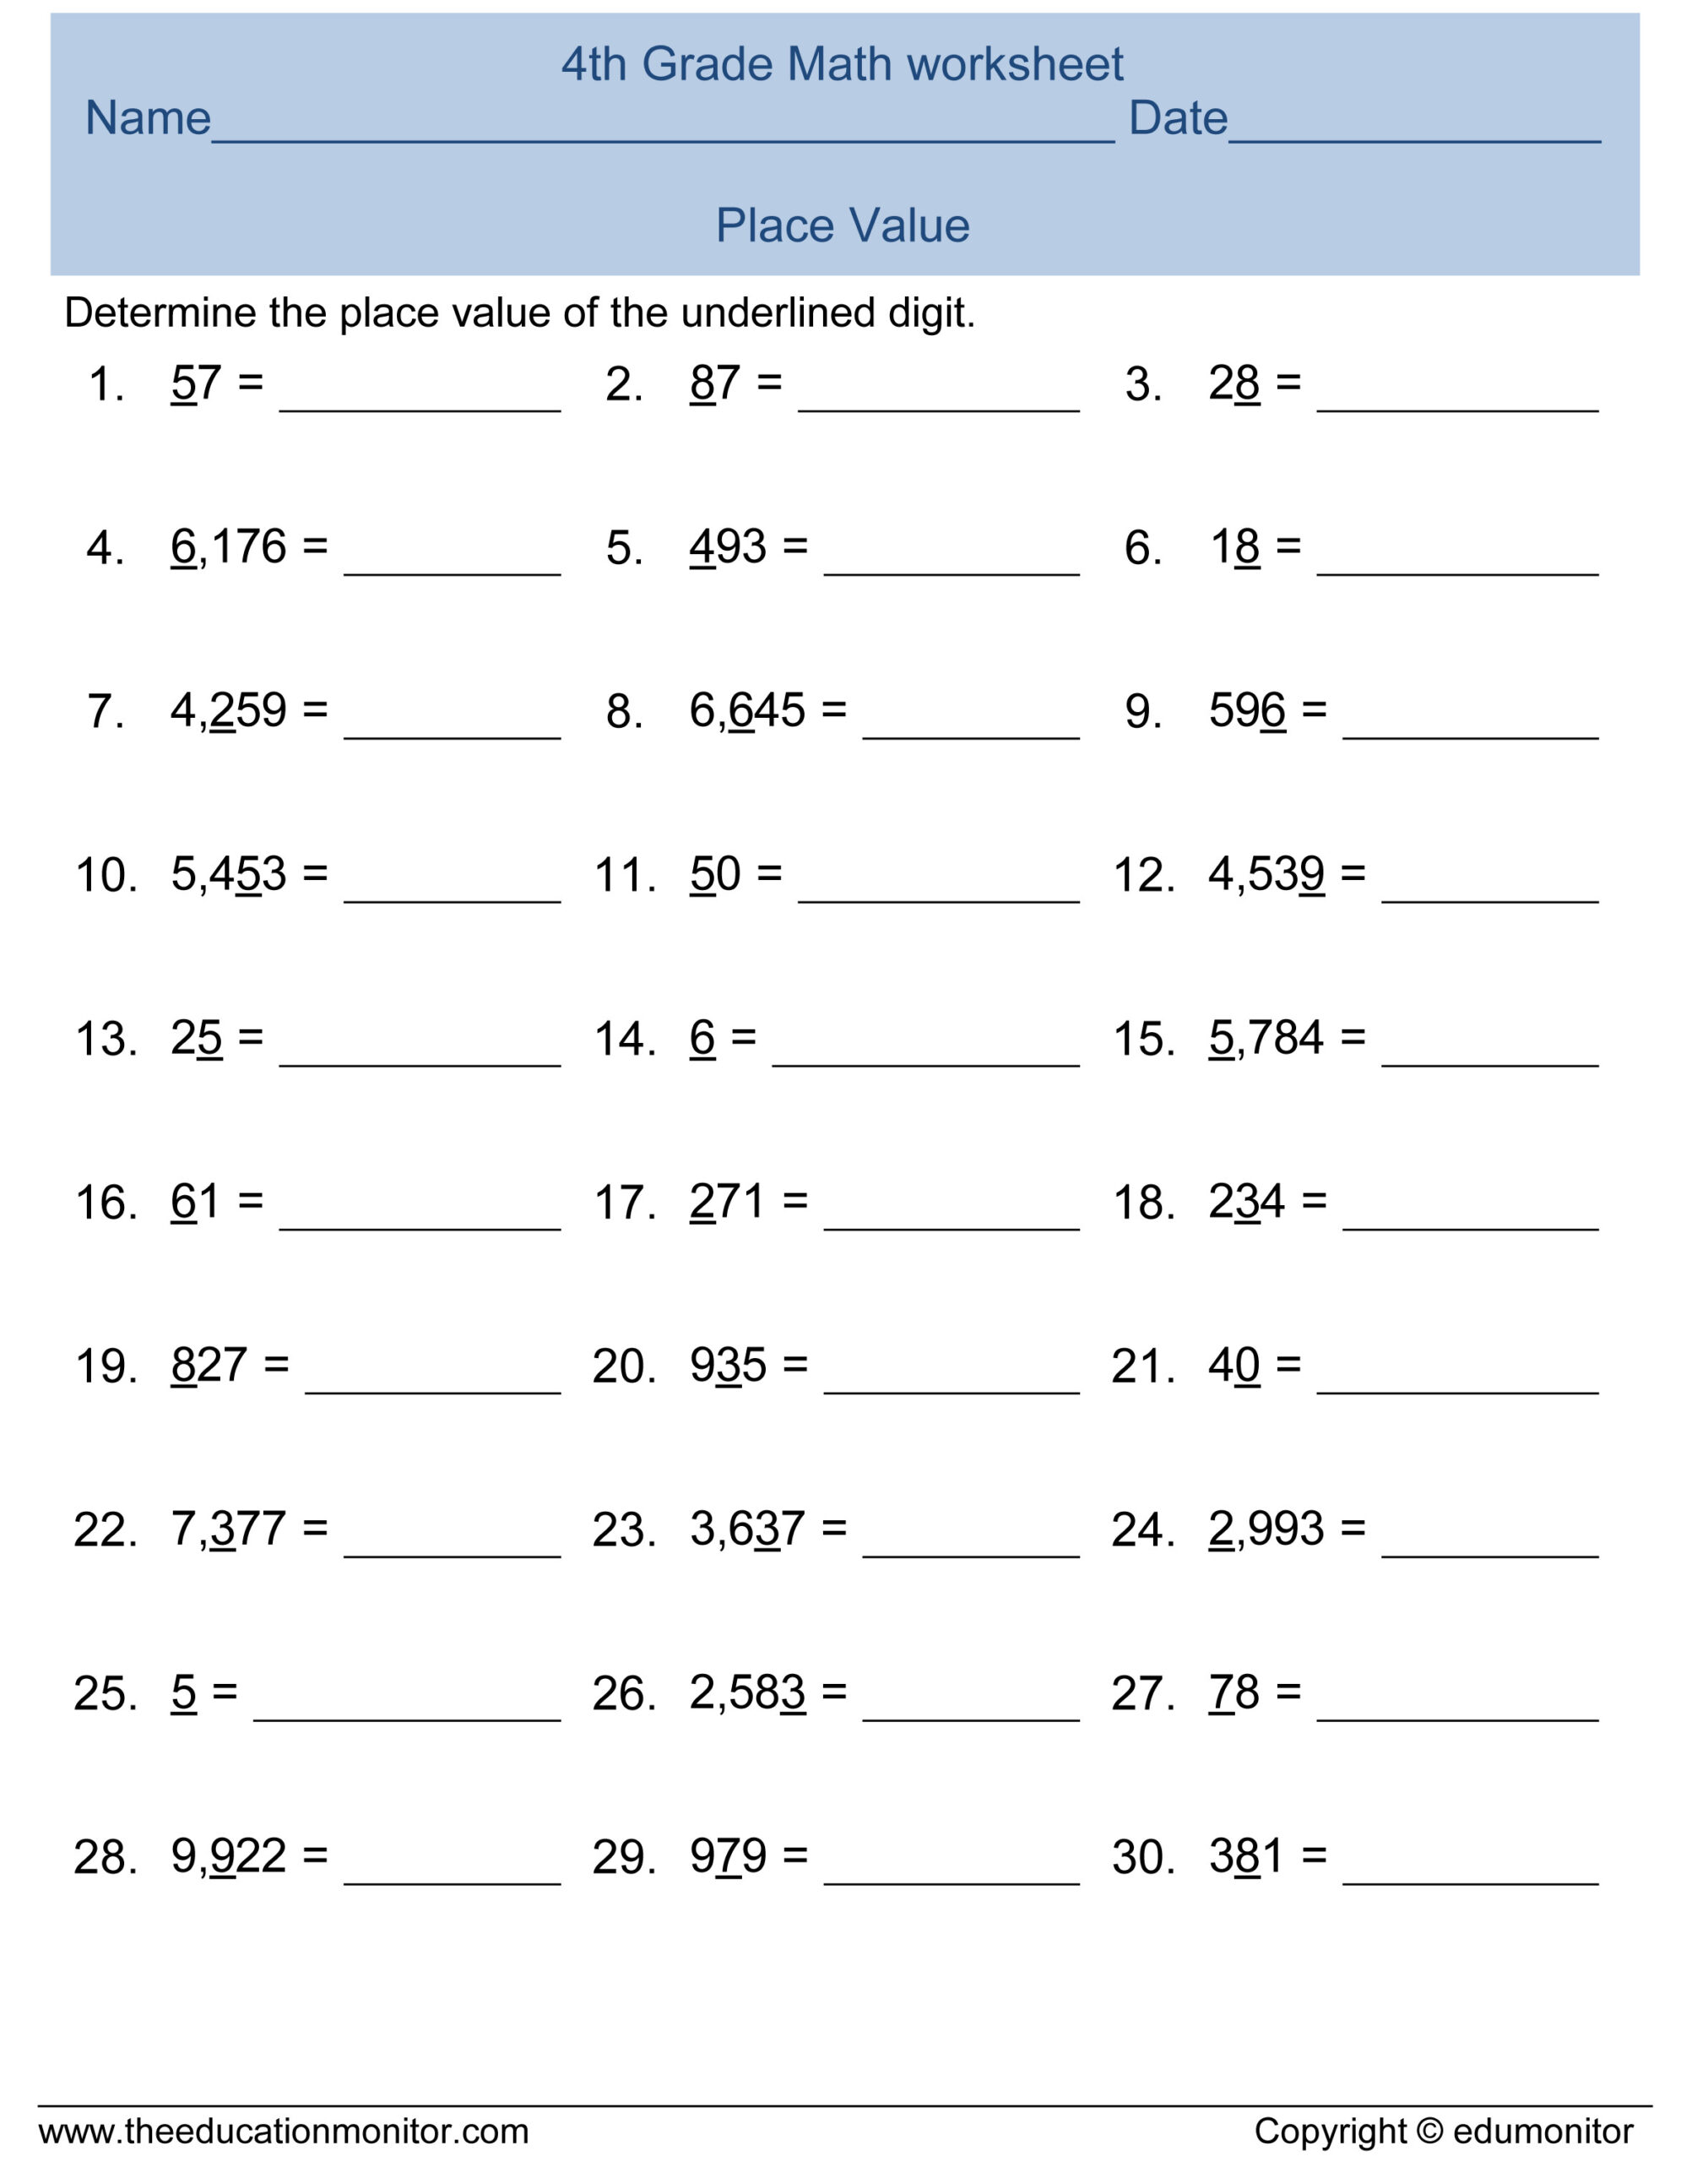 Place Value Worksheets And Printables Free Place Value Printables